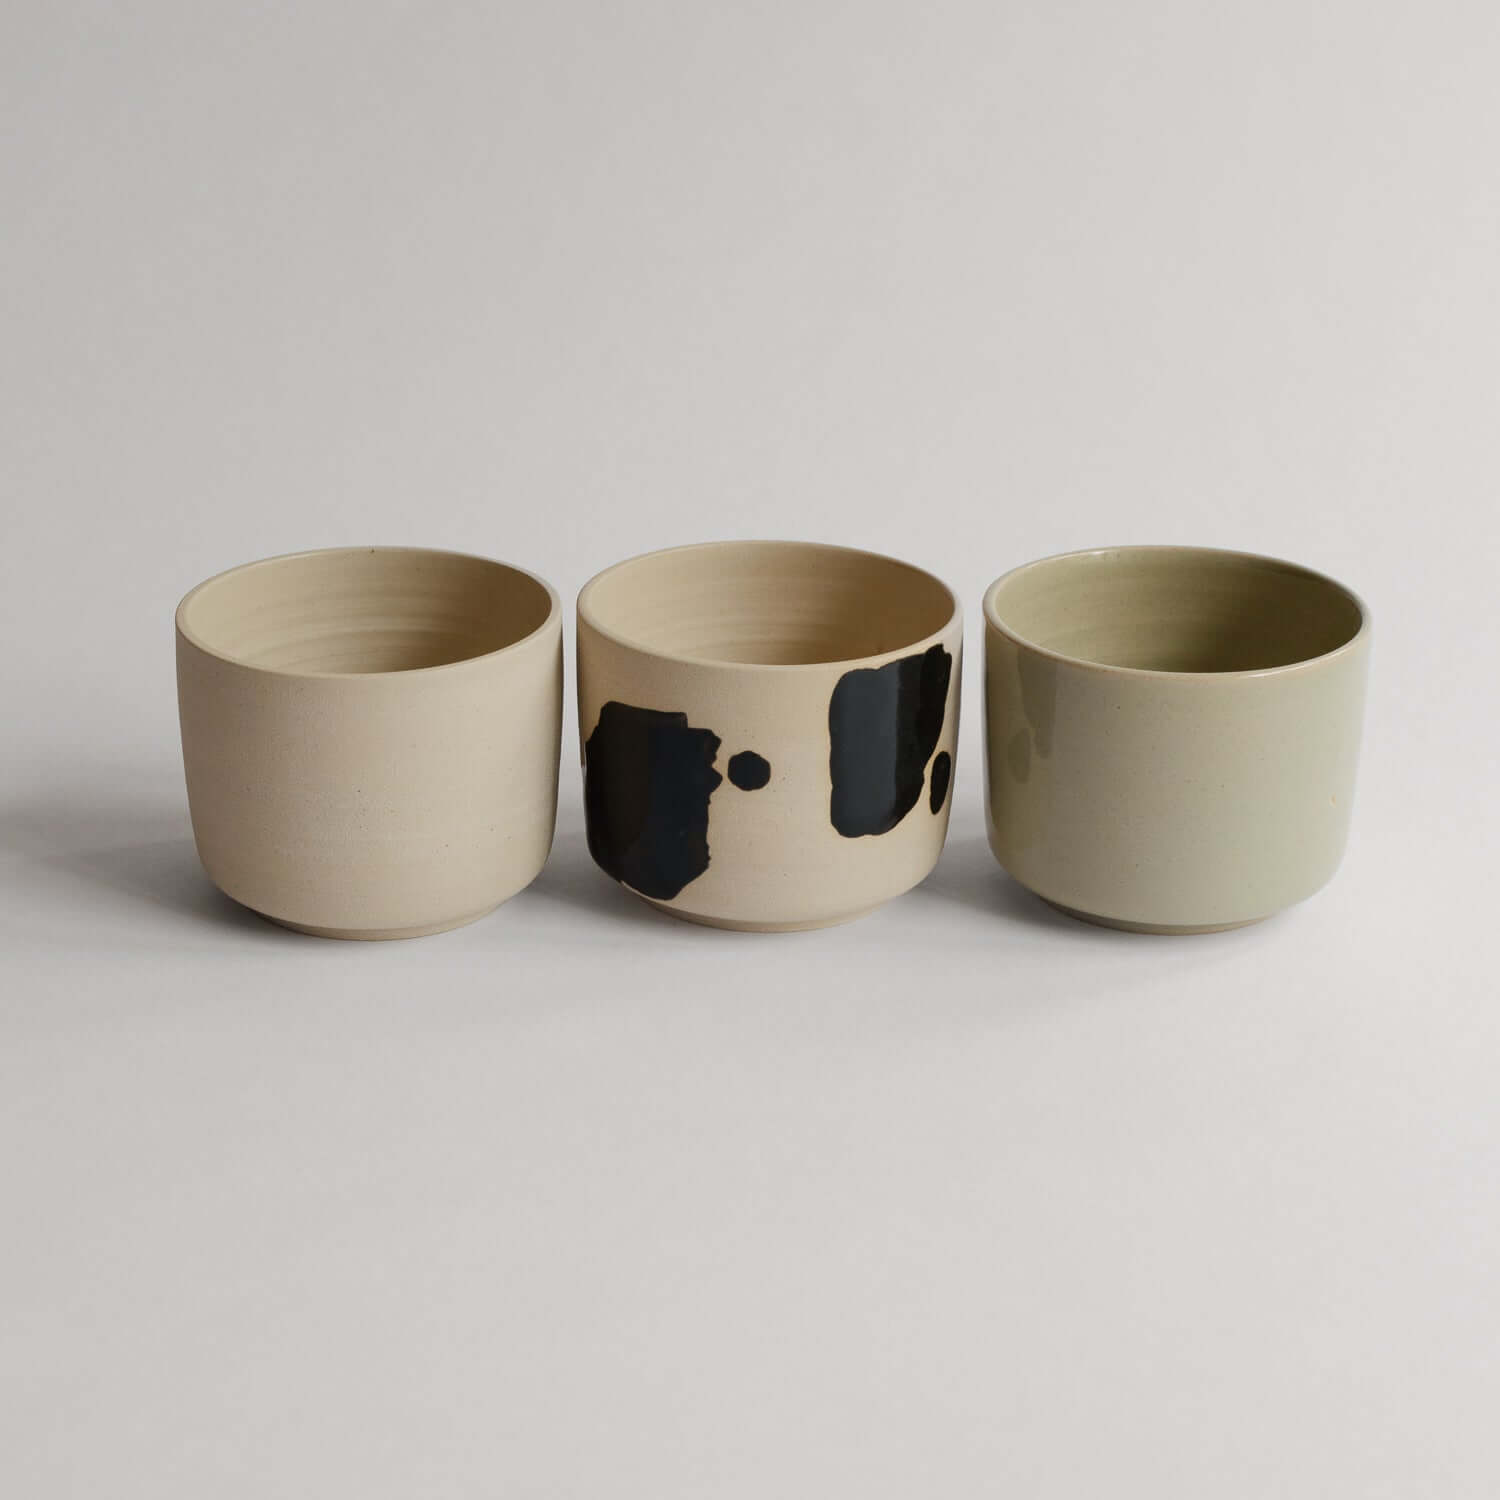 Elevate your coffee ritual with the Nomi Set - including creme, Pepe & moss cups. Unique, handmade stoneware with a touch of artisanship. von viola beuscher ceramics